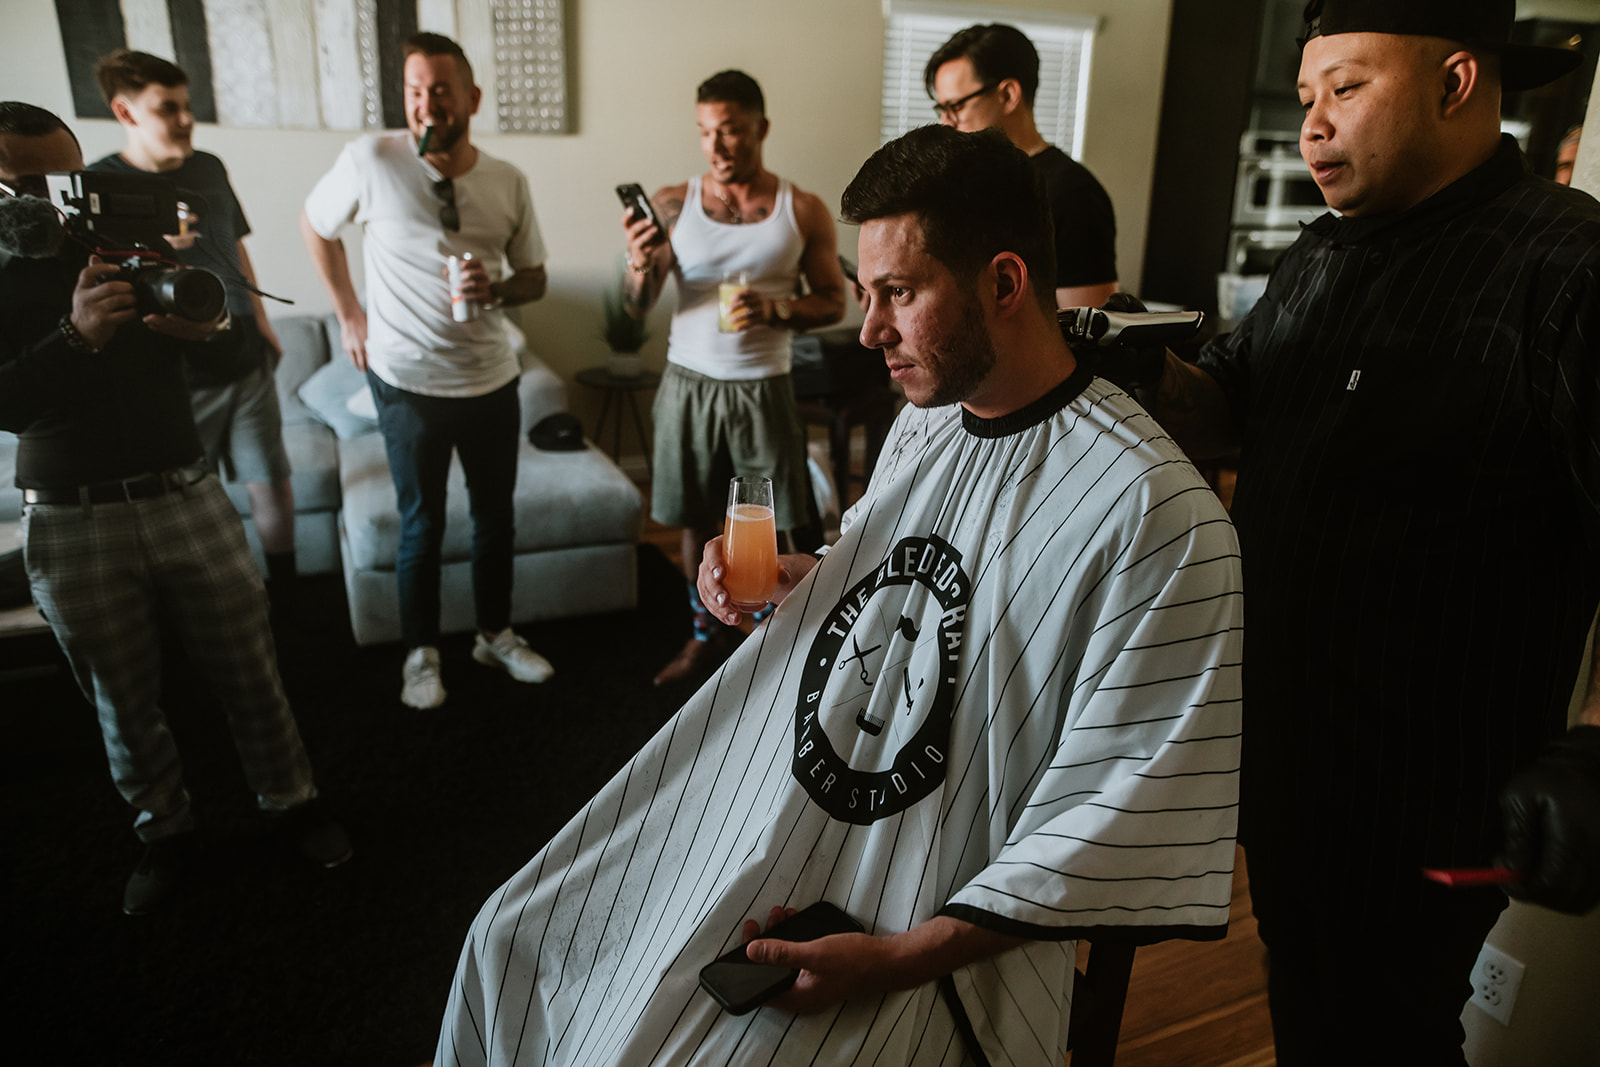 Groom getting cut & shave before wedding ceremony 